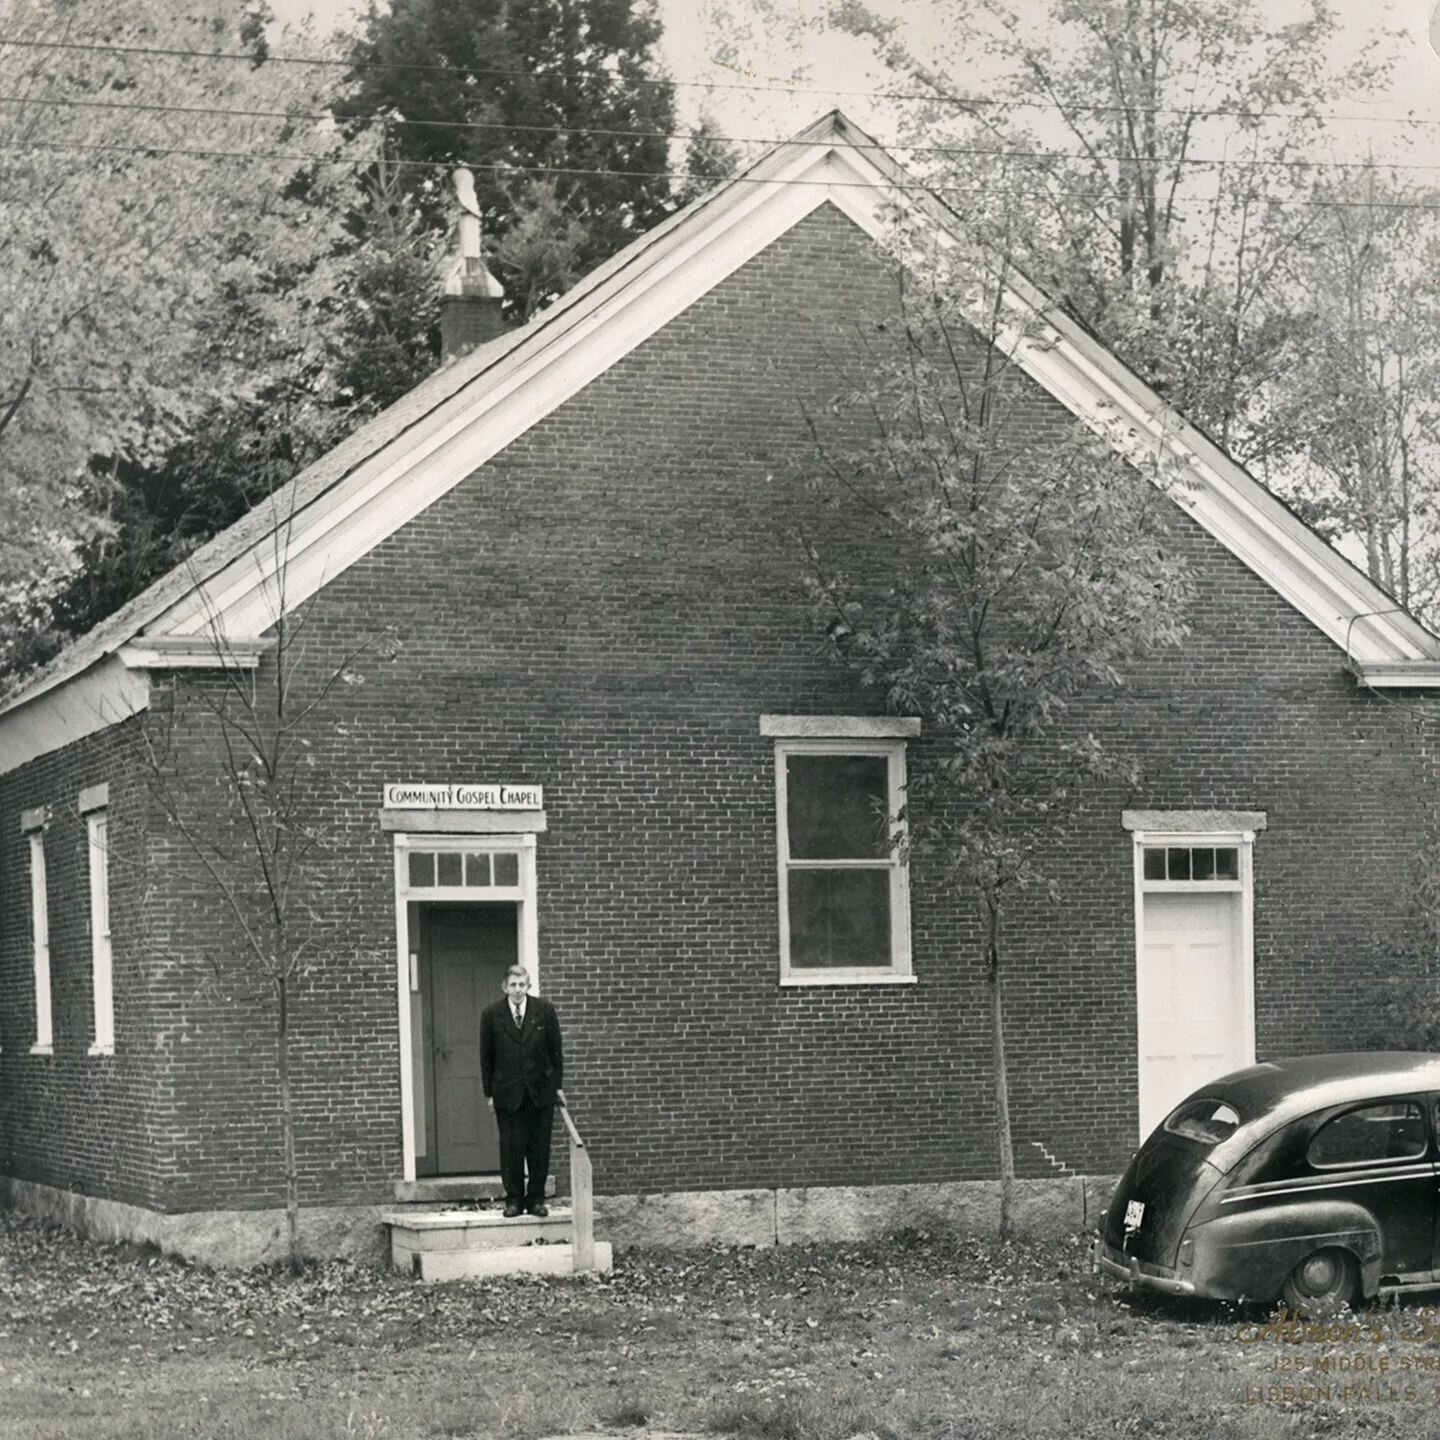 The Free Baptist Church built in 1845, known more generally as Plummer&rsquo;s Church, was put up for sale in the 1950&rsquo;s. The ad read &ldquo;Church for sale, Plummer&rsquo;s Mills, Swamp Road Durham. Pews, bricks, land. Will be torn down.&rdquo